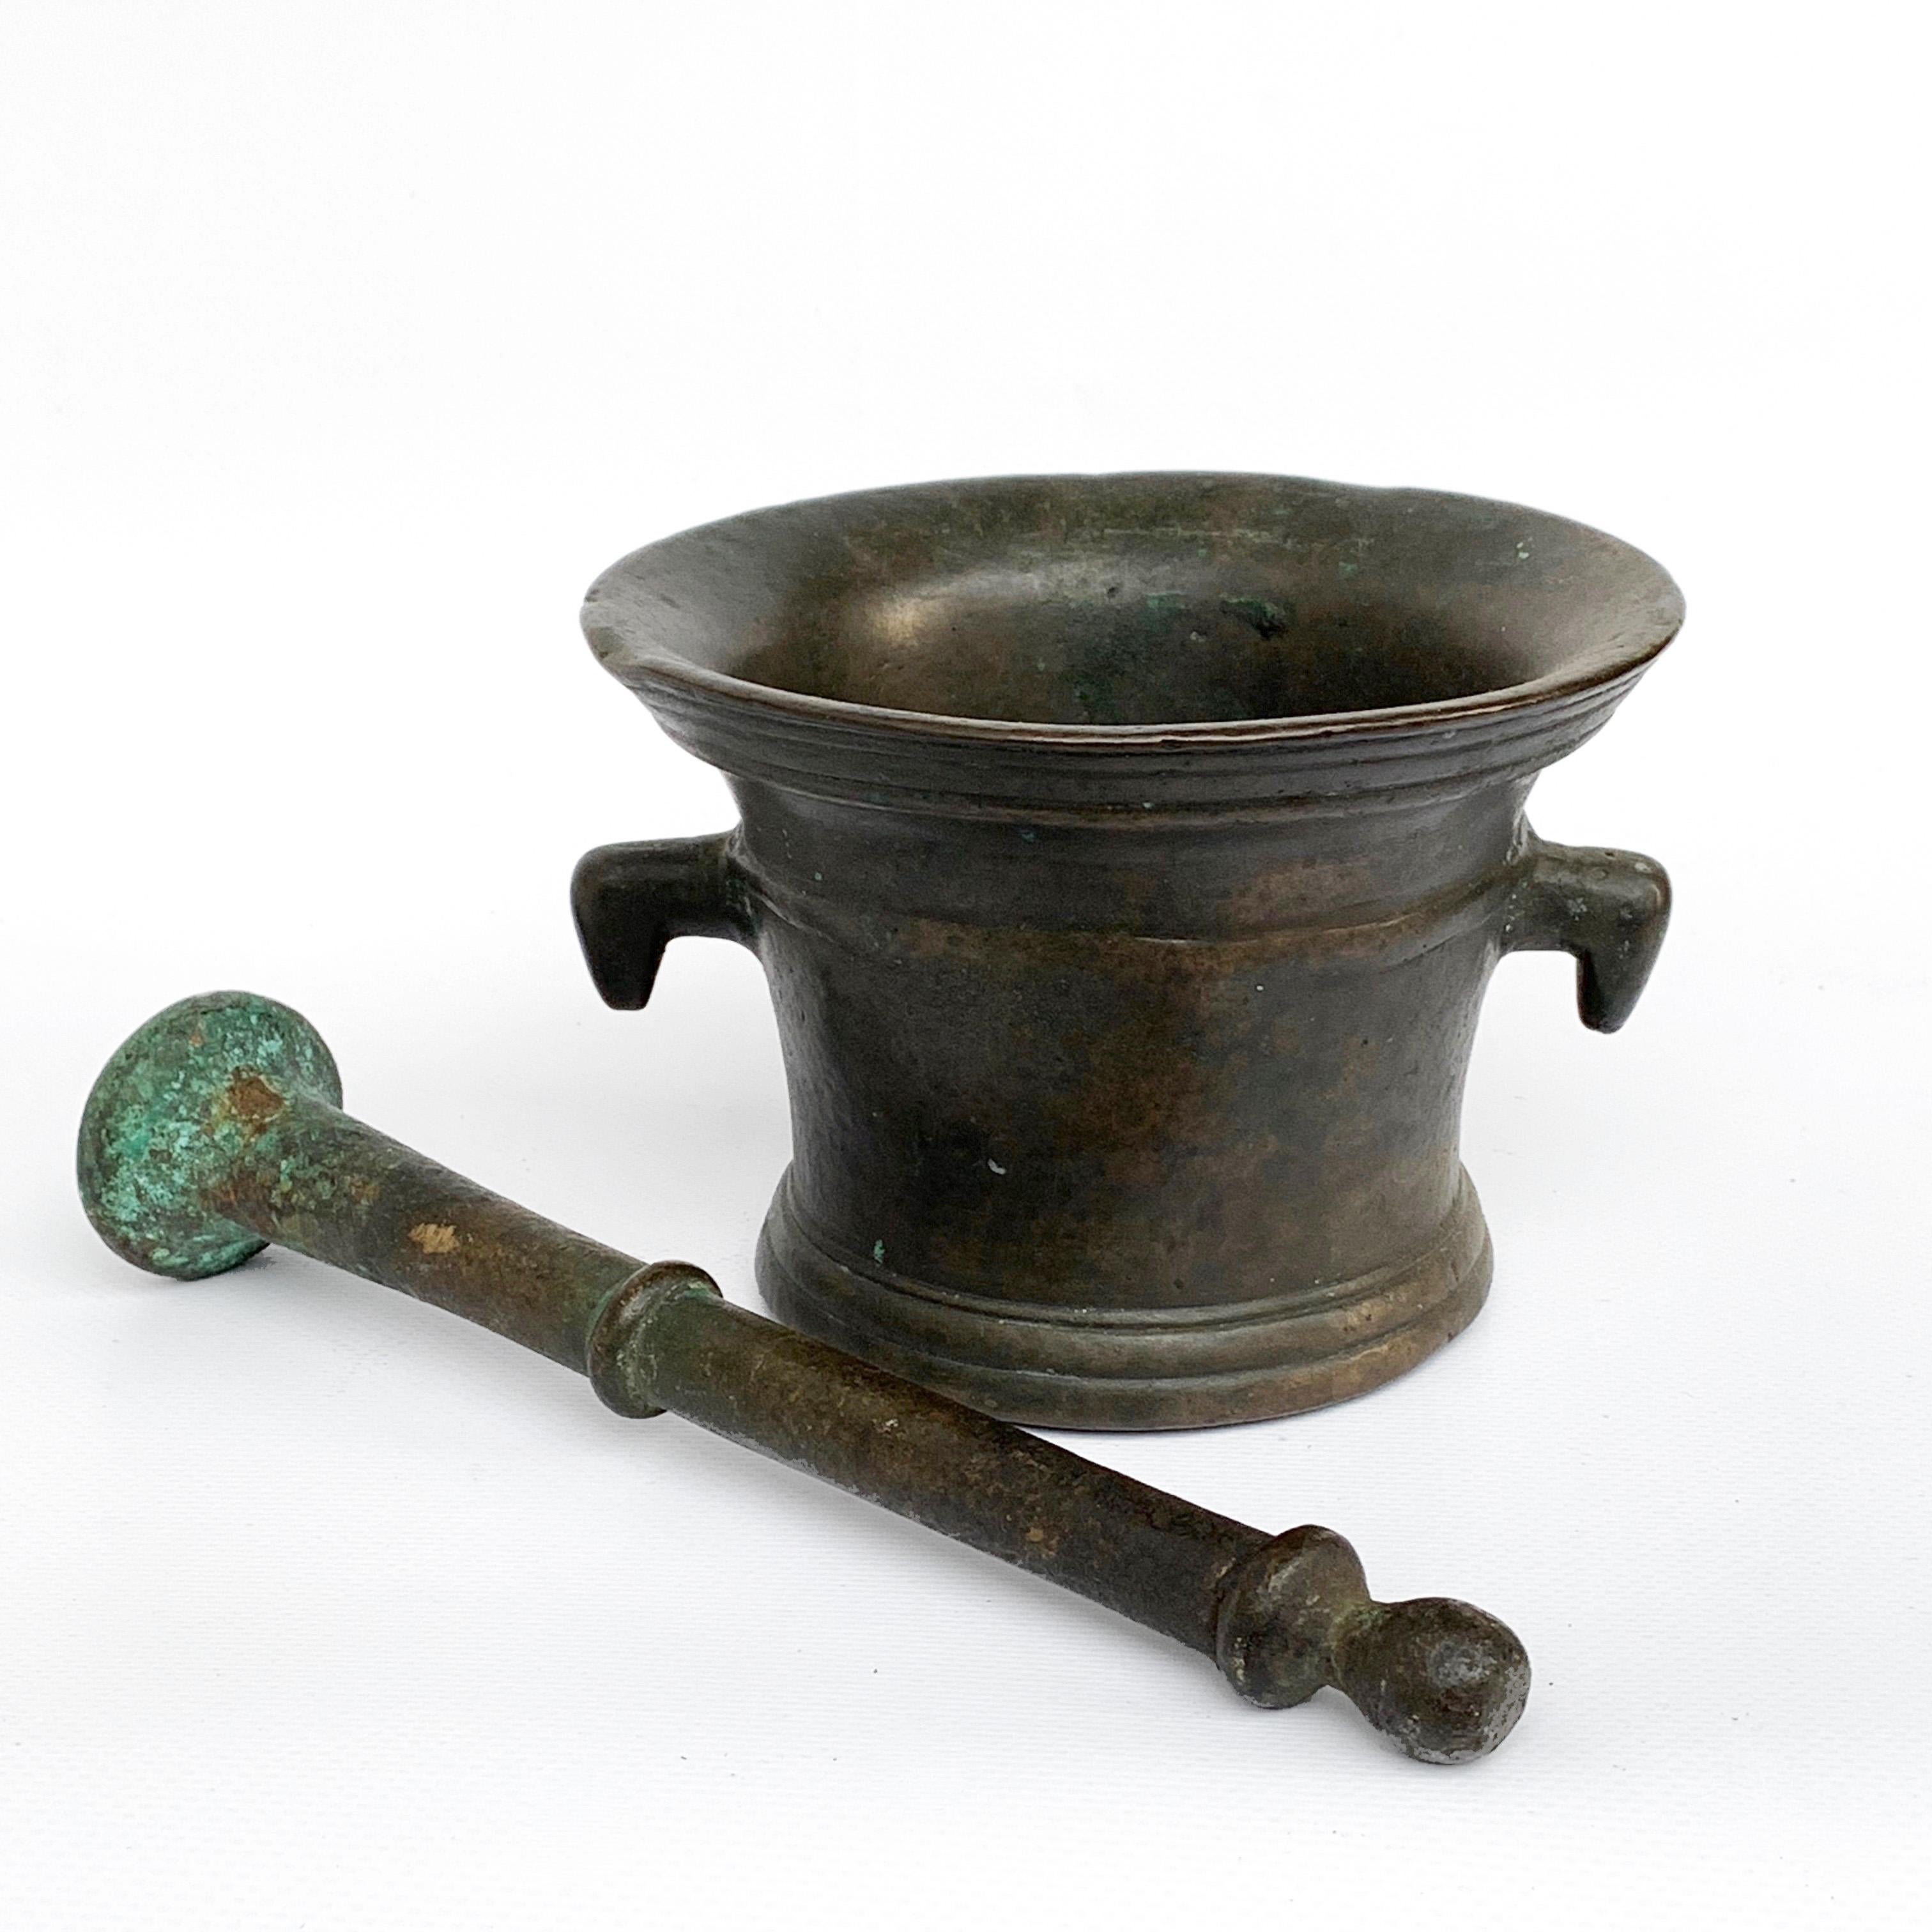 Antique bronze mortar. Handmade with pestle. Original patina
Mortar from pharmacy or herbalist.

Italian bronze mortar and pestle
Measure: Pestle height 8.85 in.